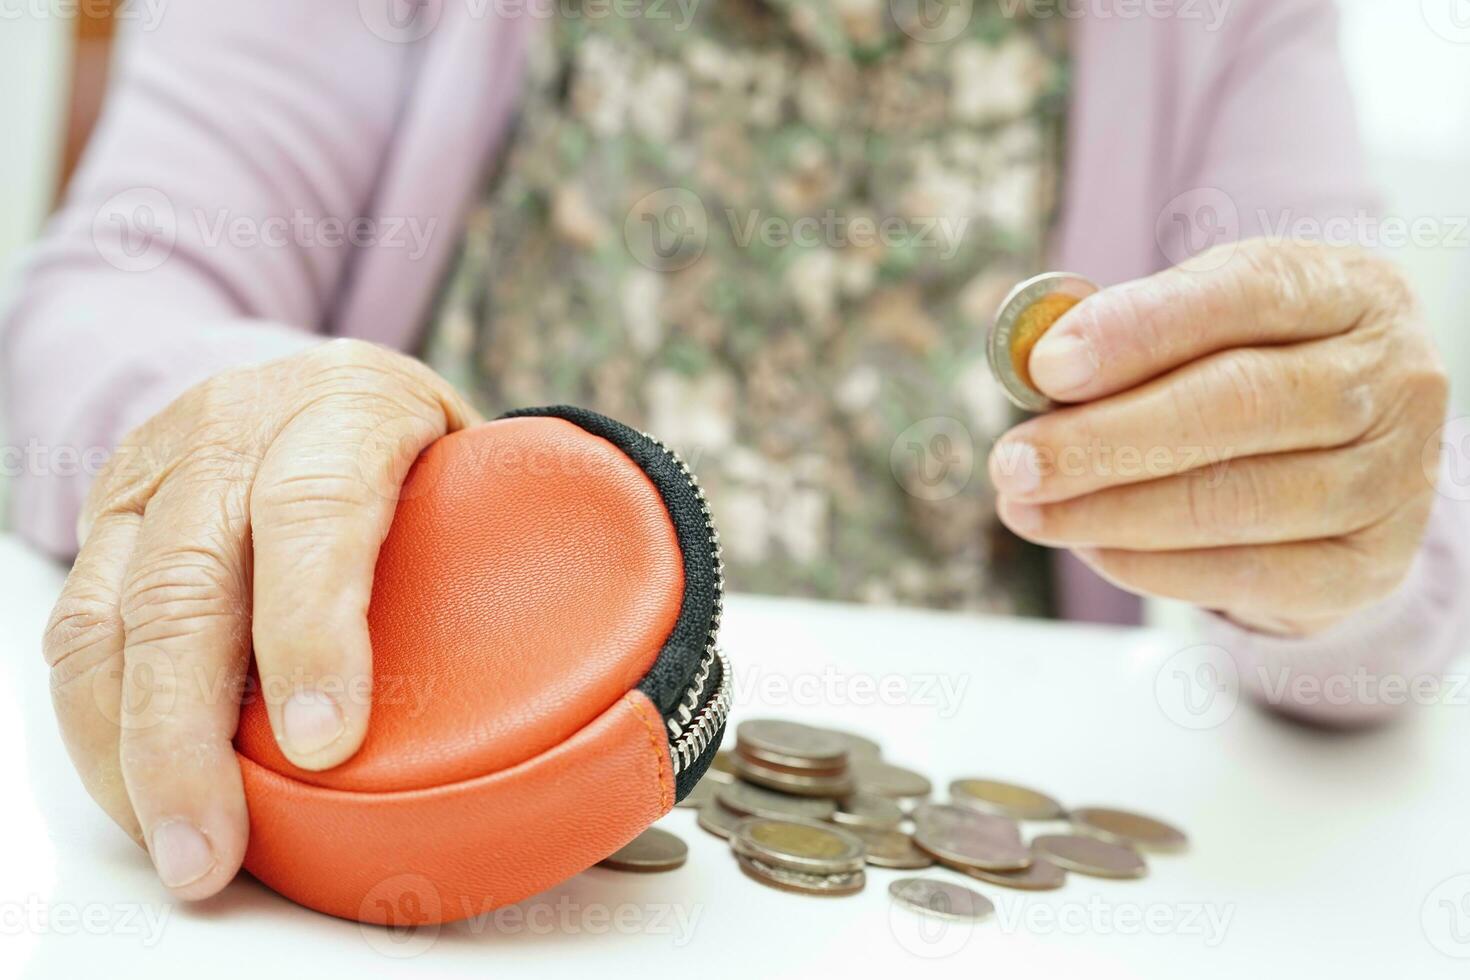 Retired elderly woman counting coins money and worry about monthly expenses and treatment fee payment. photo